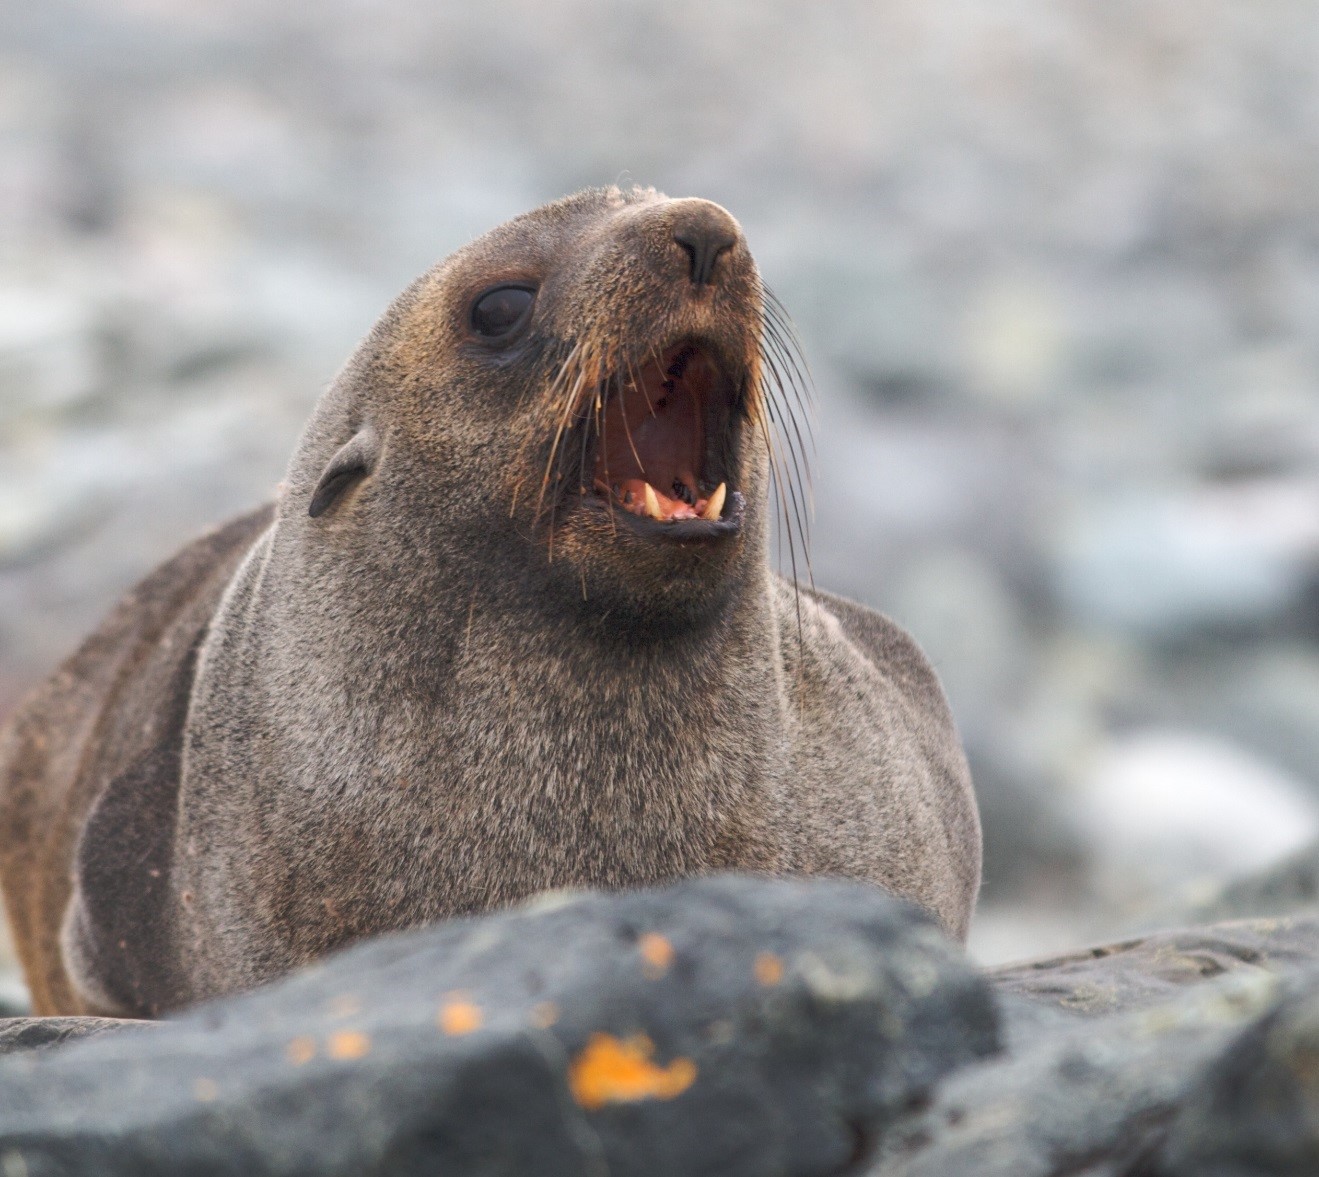 a fur seal in antarctica barks at people as they pass